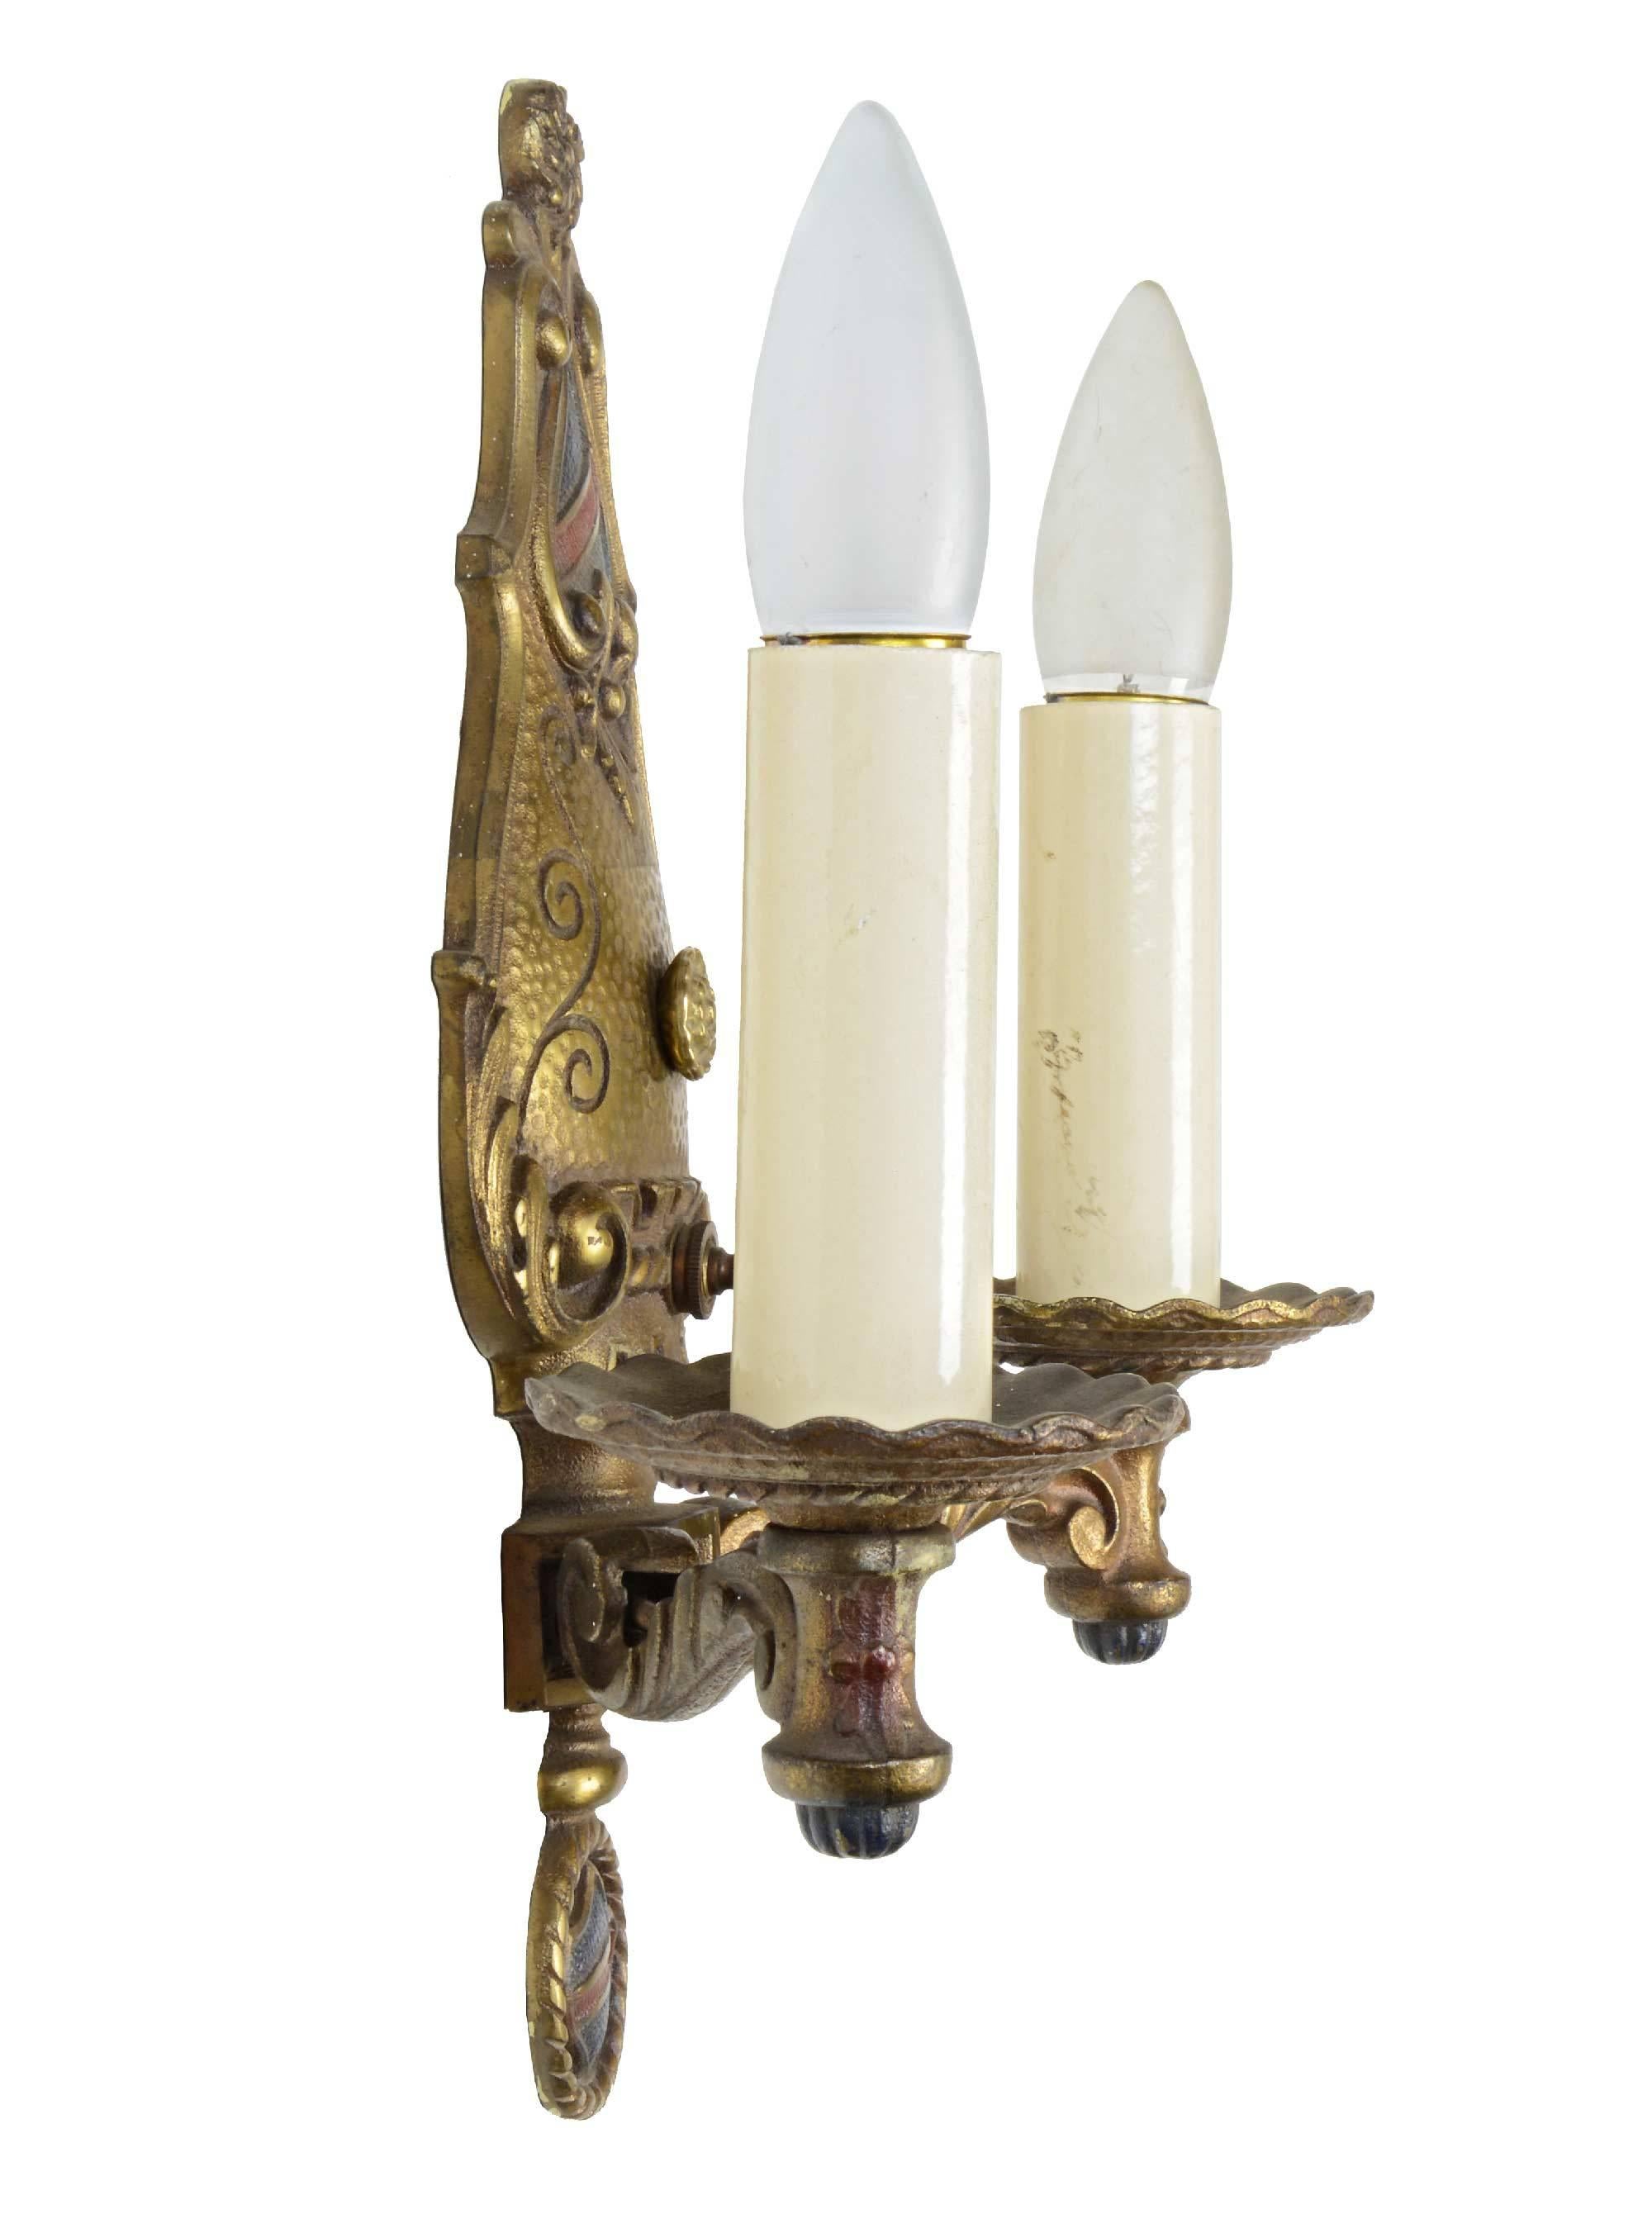 Decorative cast brass two-arm Tudor sconce with leafy arms, scroll and shield backplate and finial.

circa: 1925
Finish: Original
2 medium sockets

We find that early antique lighting was designed as objects of art and we treat each fixture